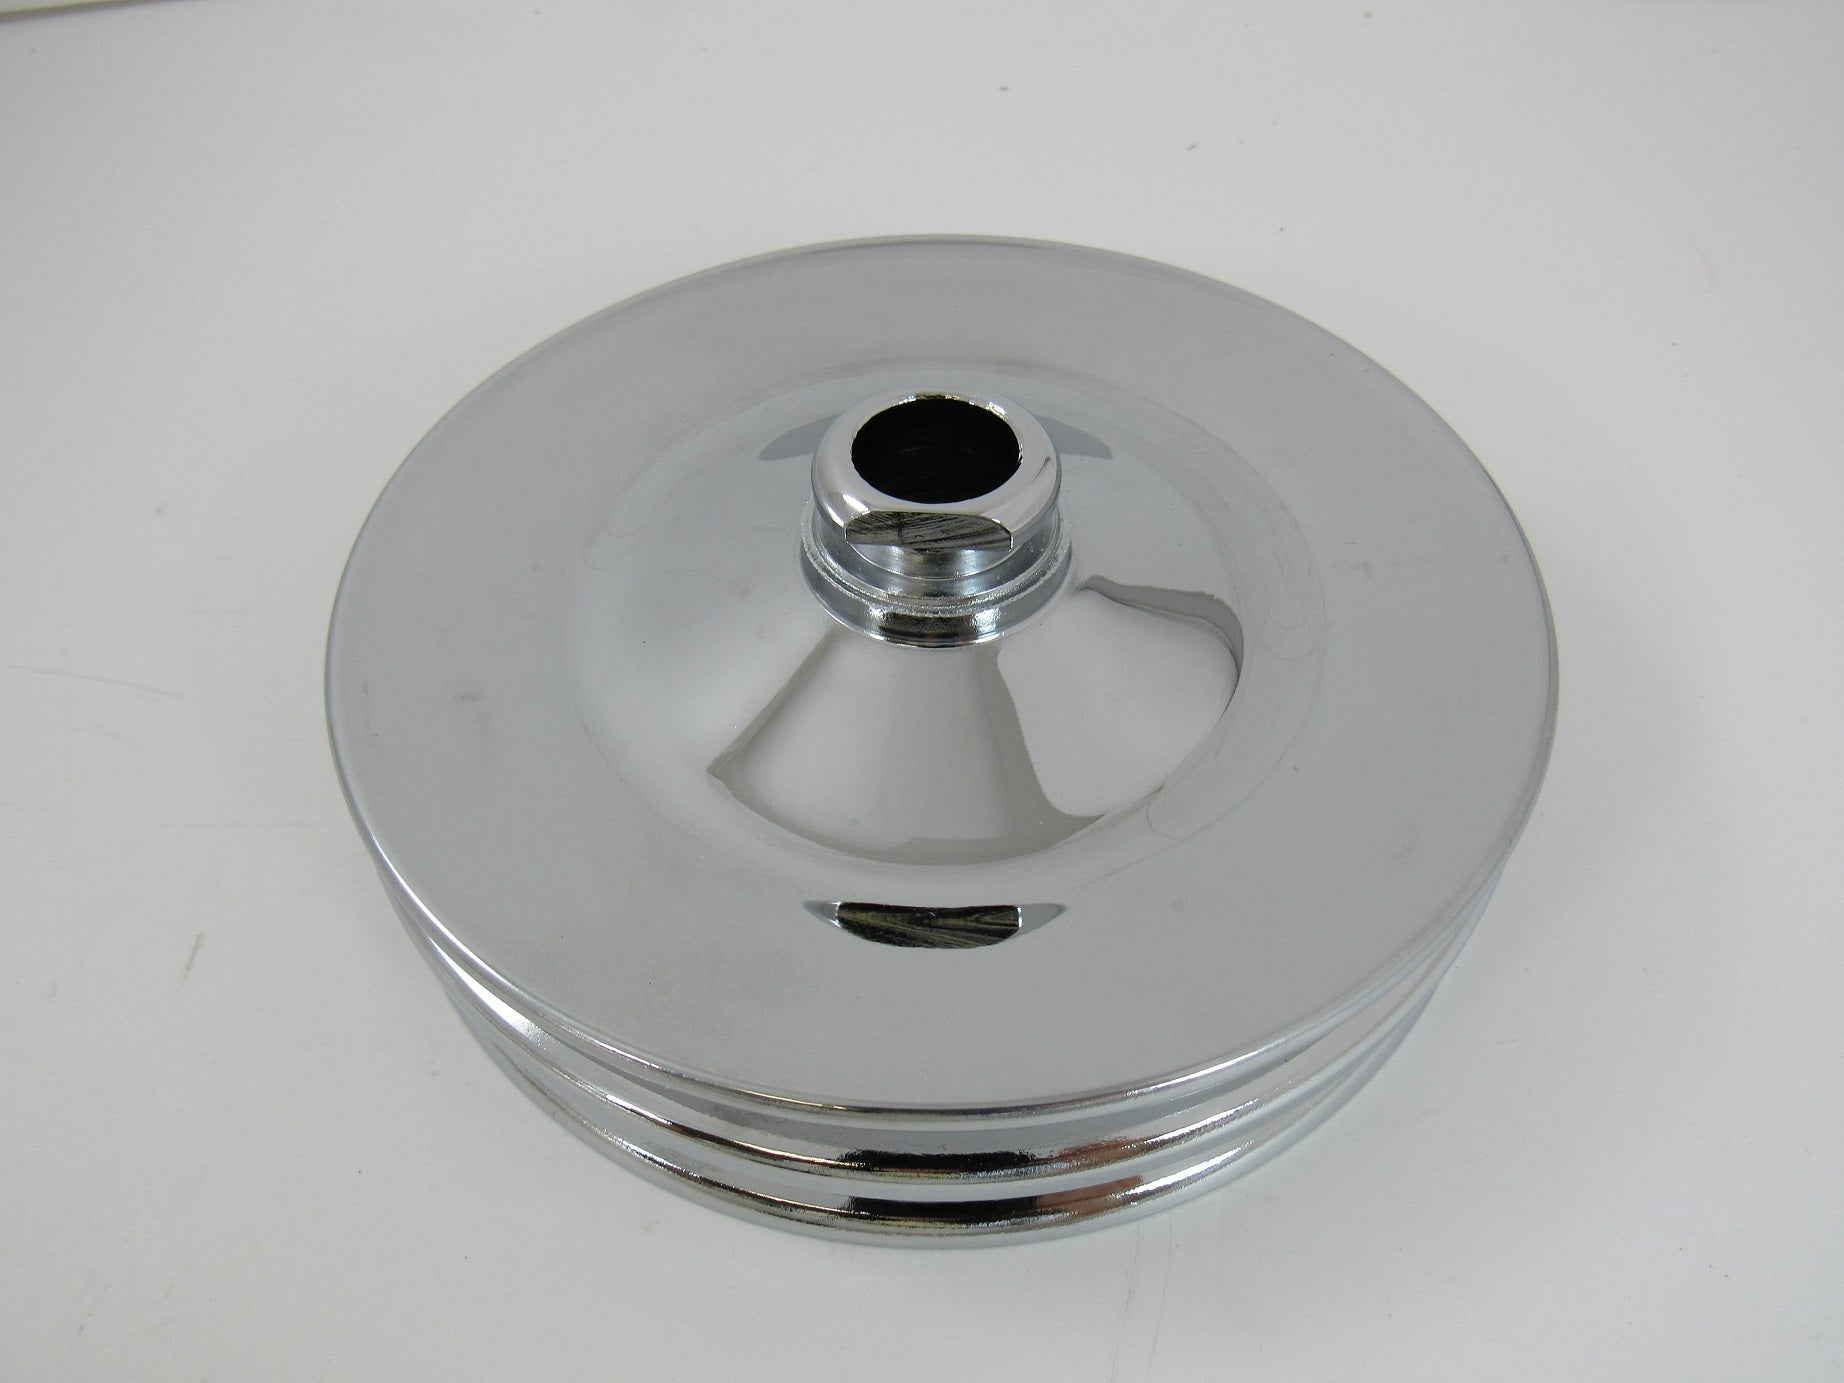 Racing Power Company R8940 Chrome gm power steering pulley-dbl 3/4 inch